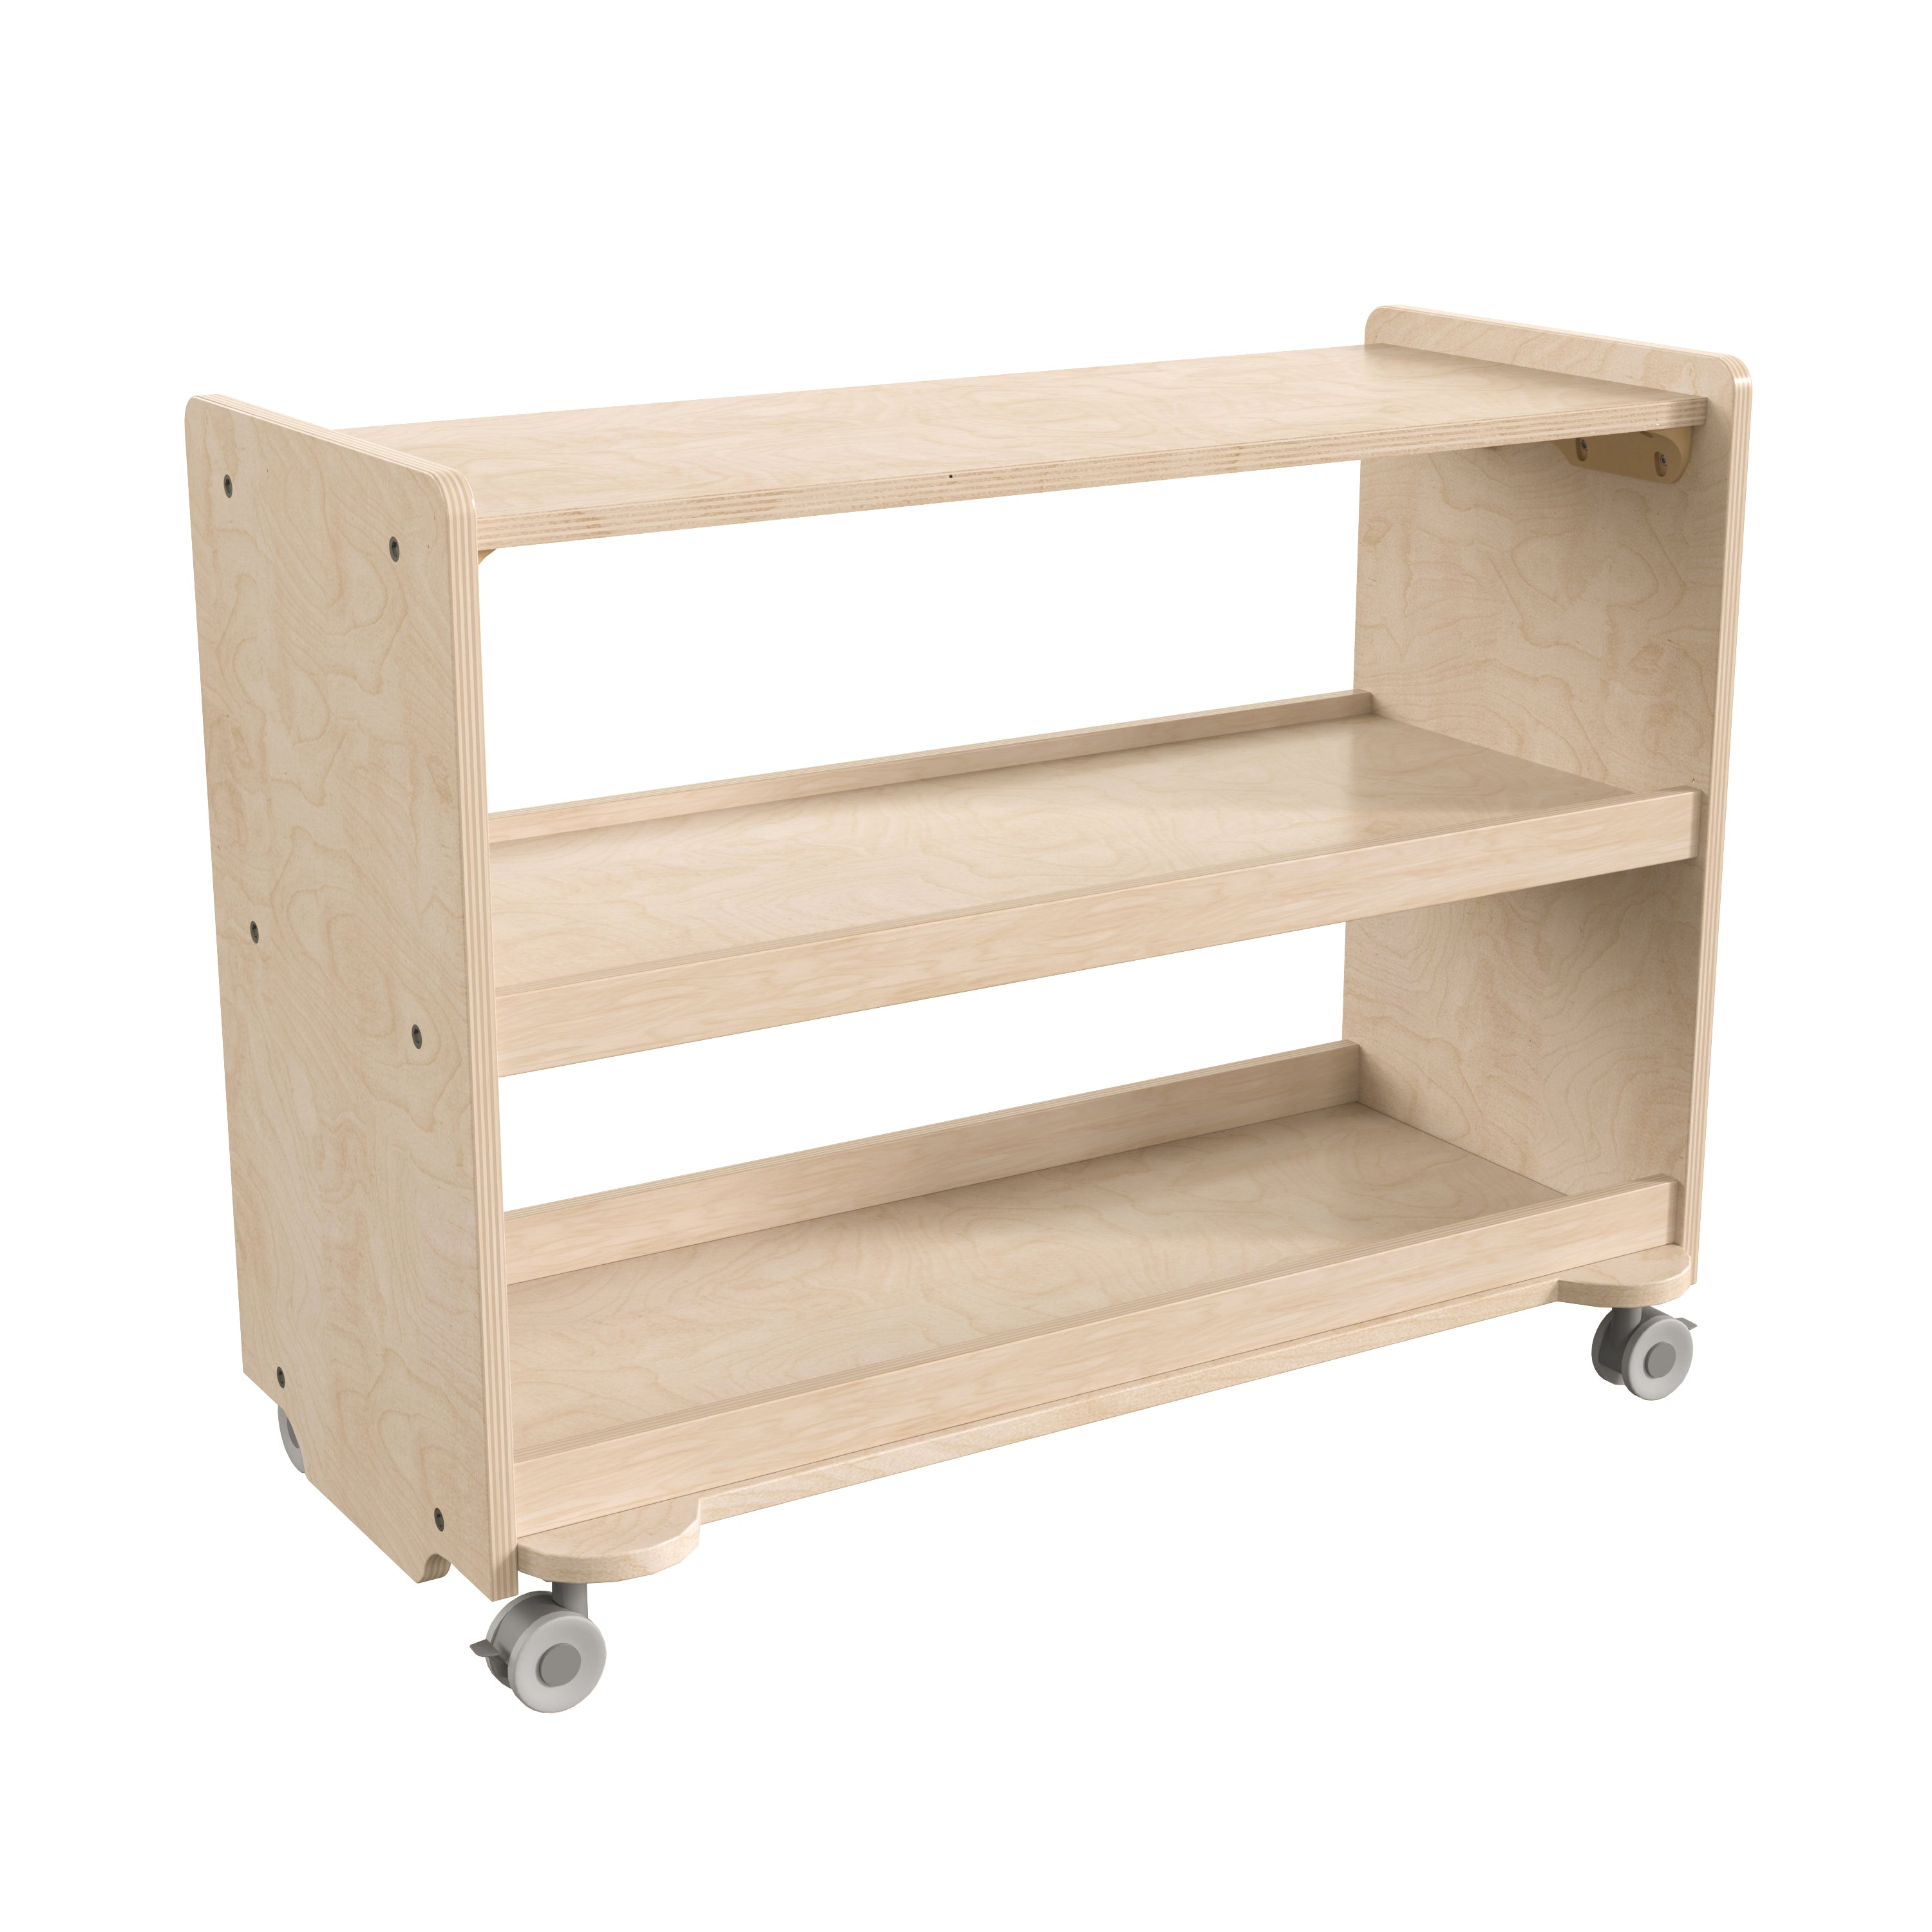 Bright Beginnings Commercial Grade Space Saving Wooden Mobile Classroom Storage Cart with Locking Caster Wheels, Kid Friendly Design-en Classroom Storage Carts-Flash Furniture-Wall2Wall Furnishings